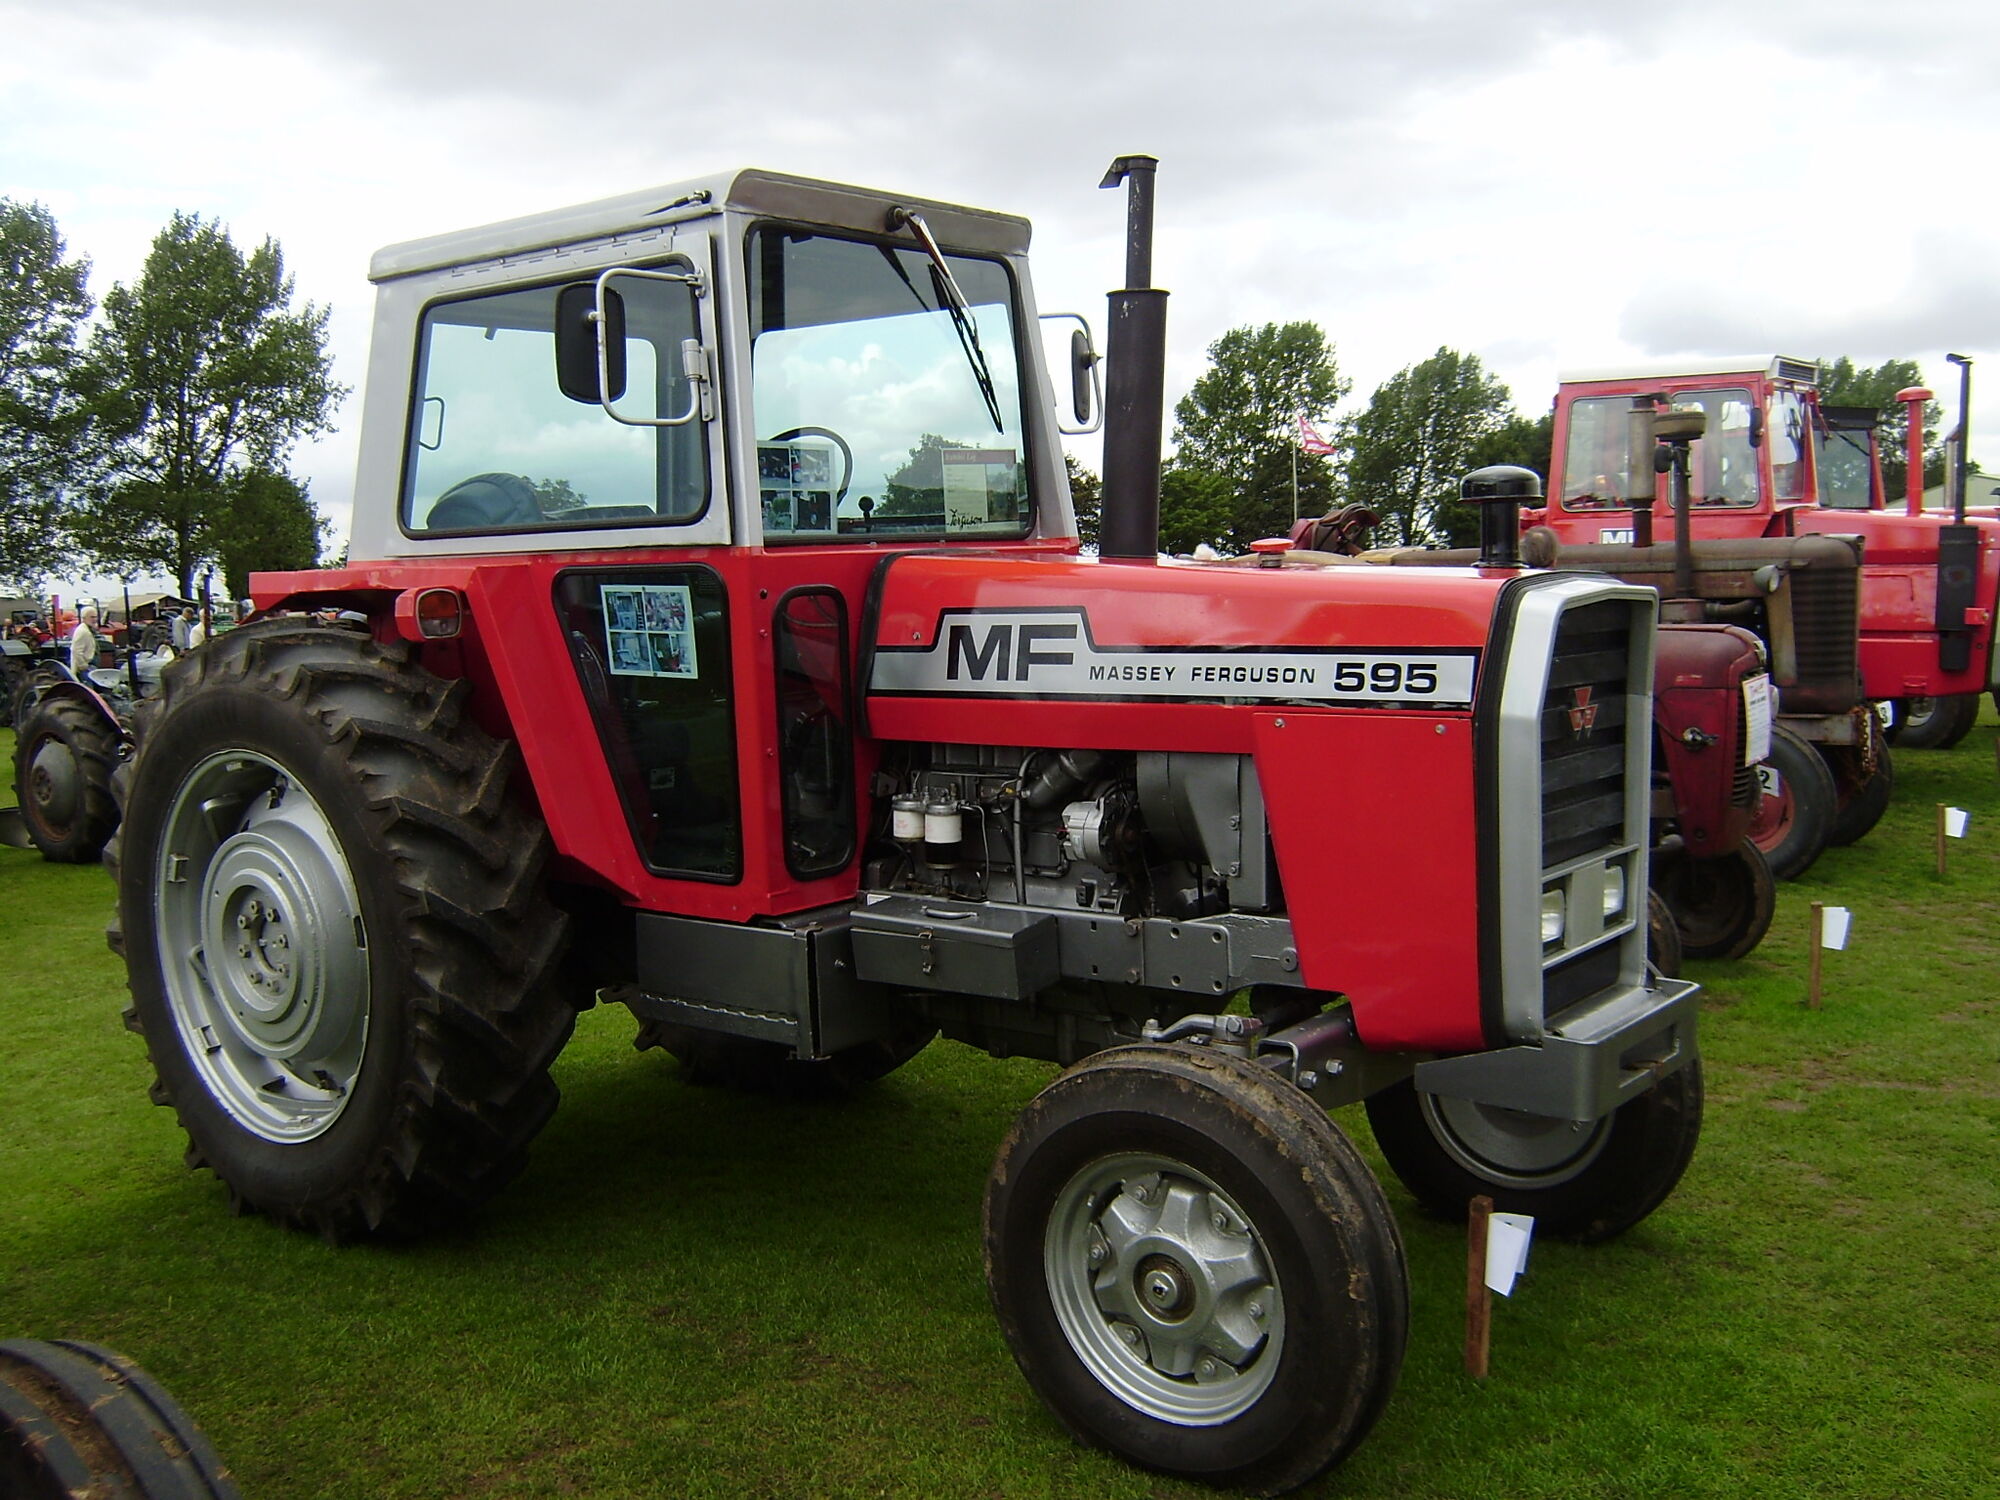 Massey Ferguson 595 Tractor And Construction Plant Wiki Fandom Powered By Wikia 6432